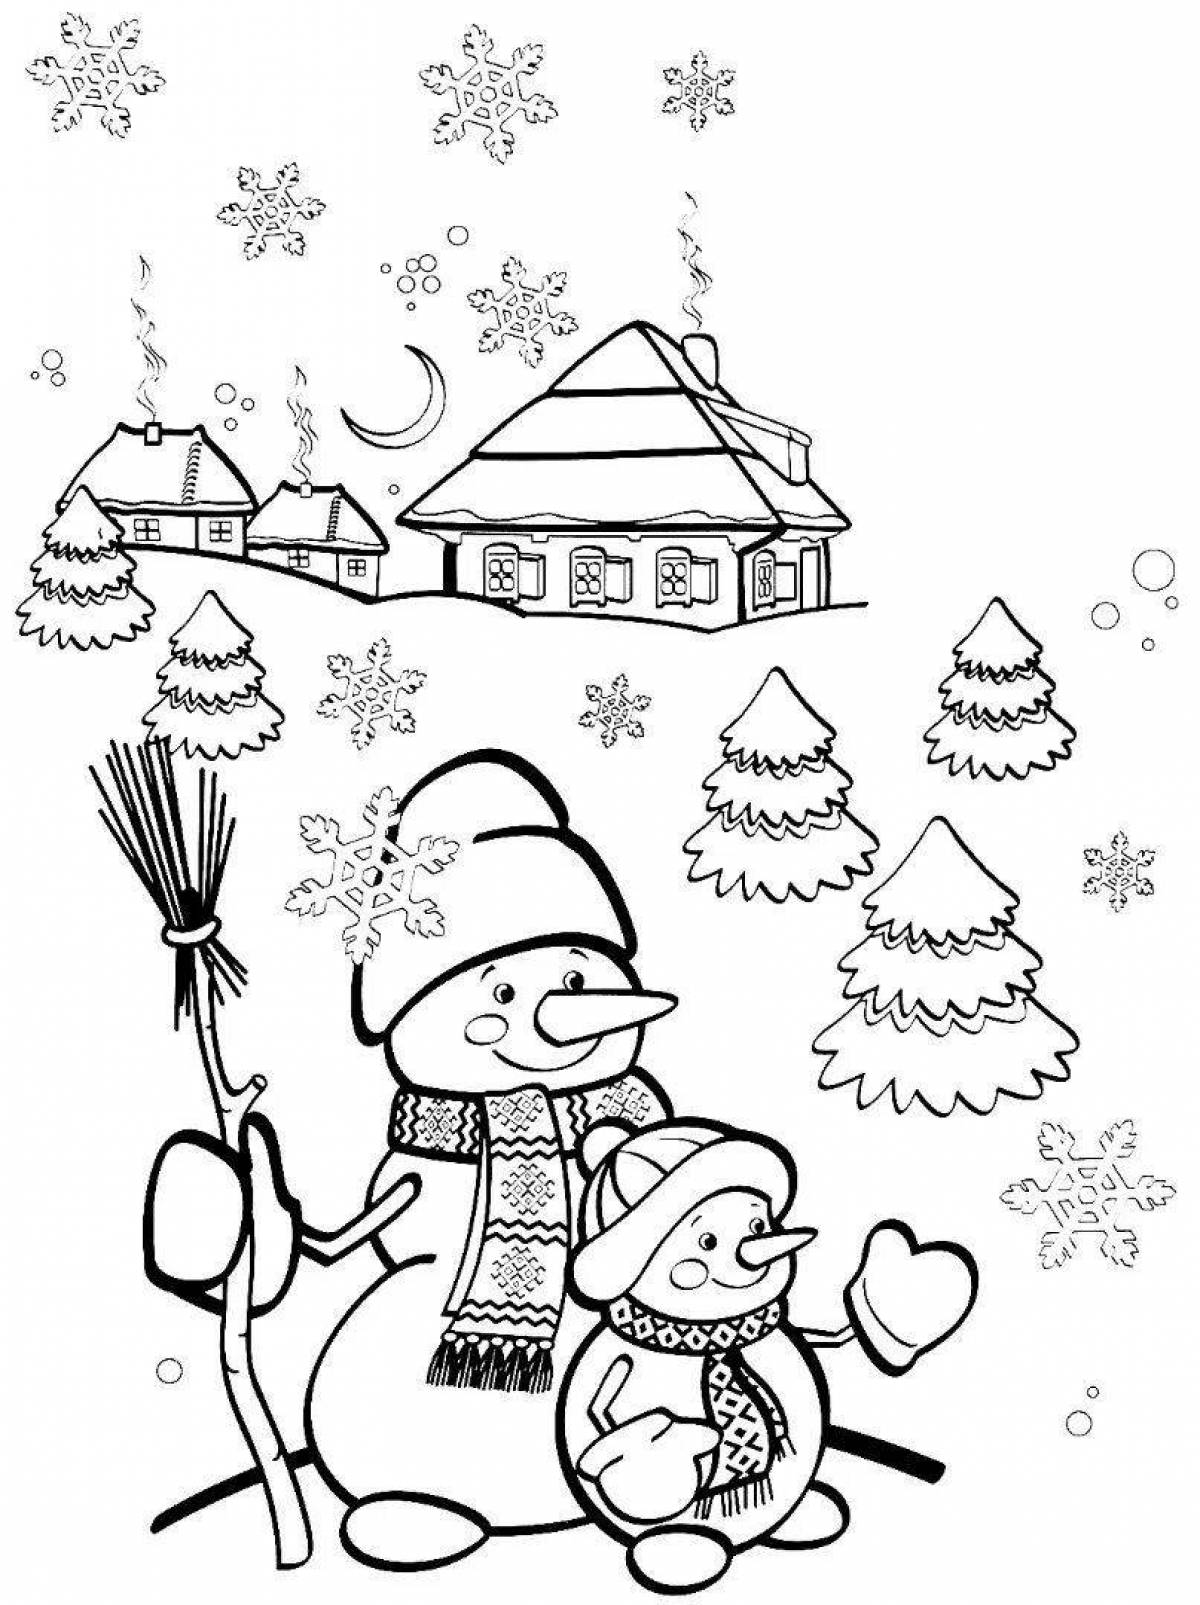 Cheerful winter landscape coloring for children 7 years old